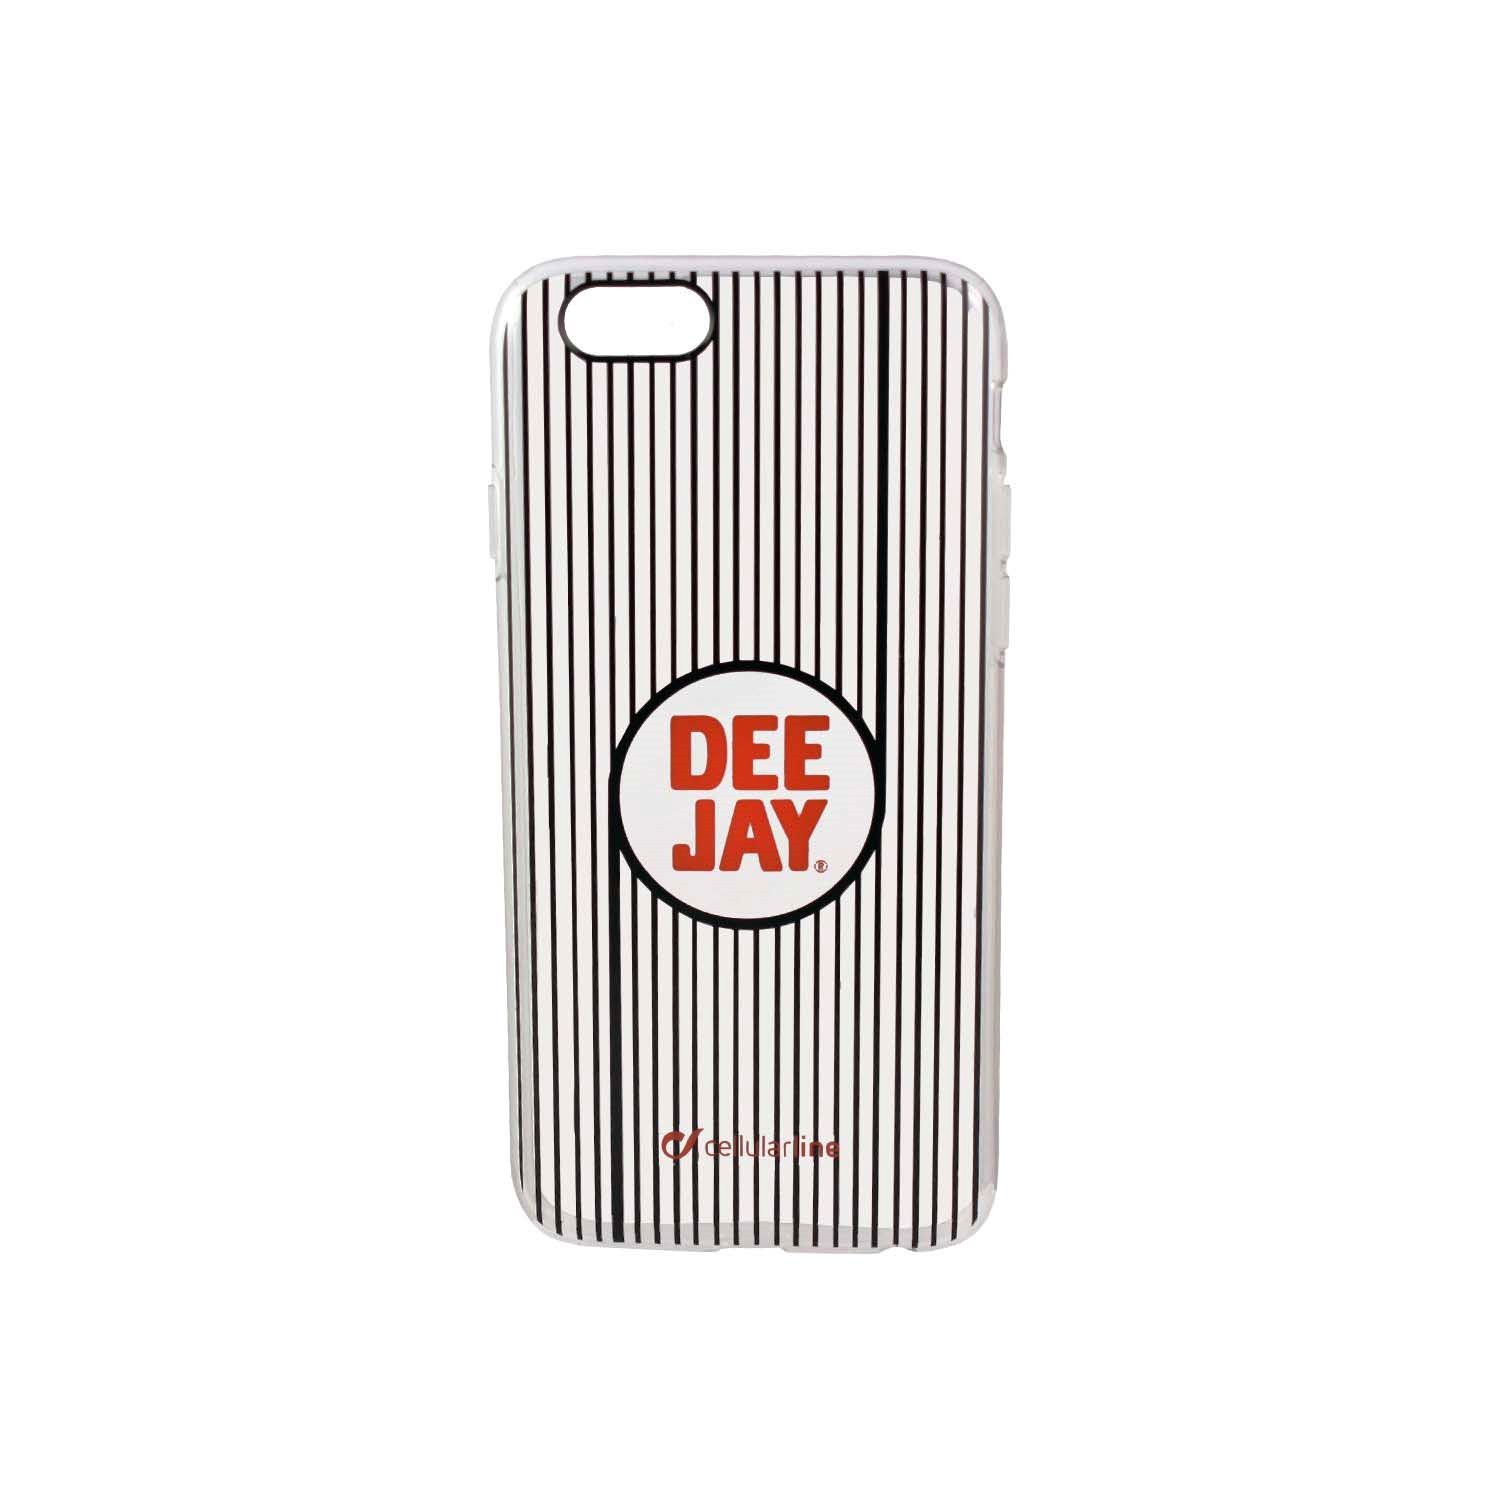 Deejay cover Apple